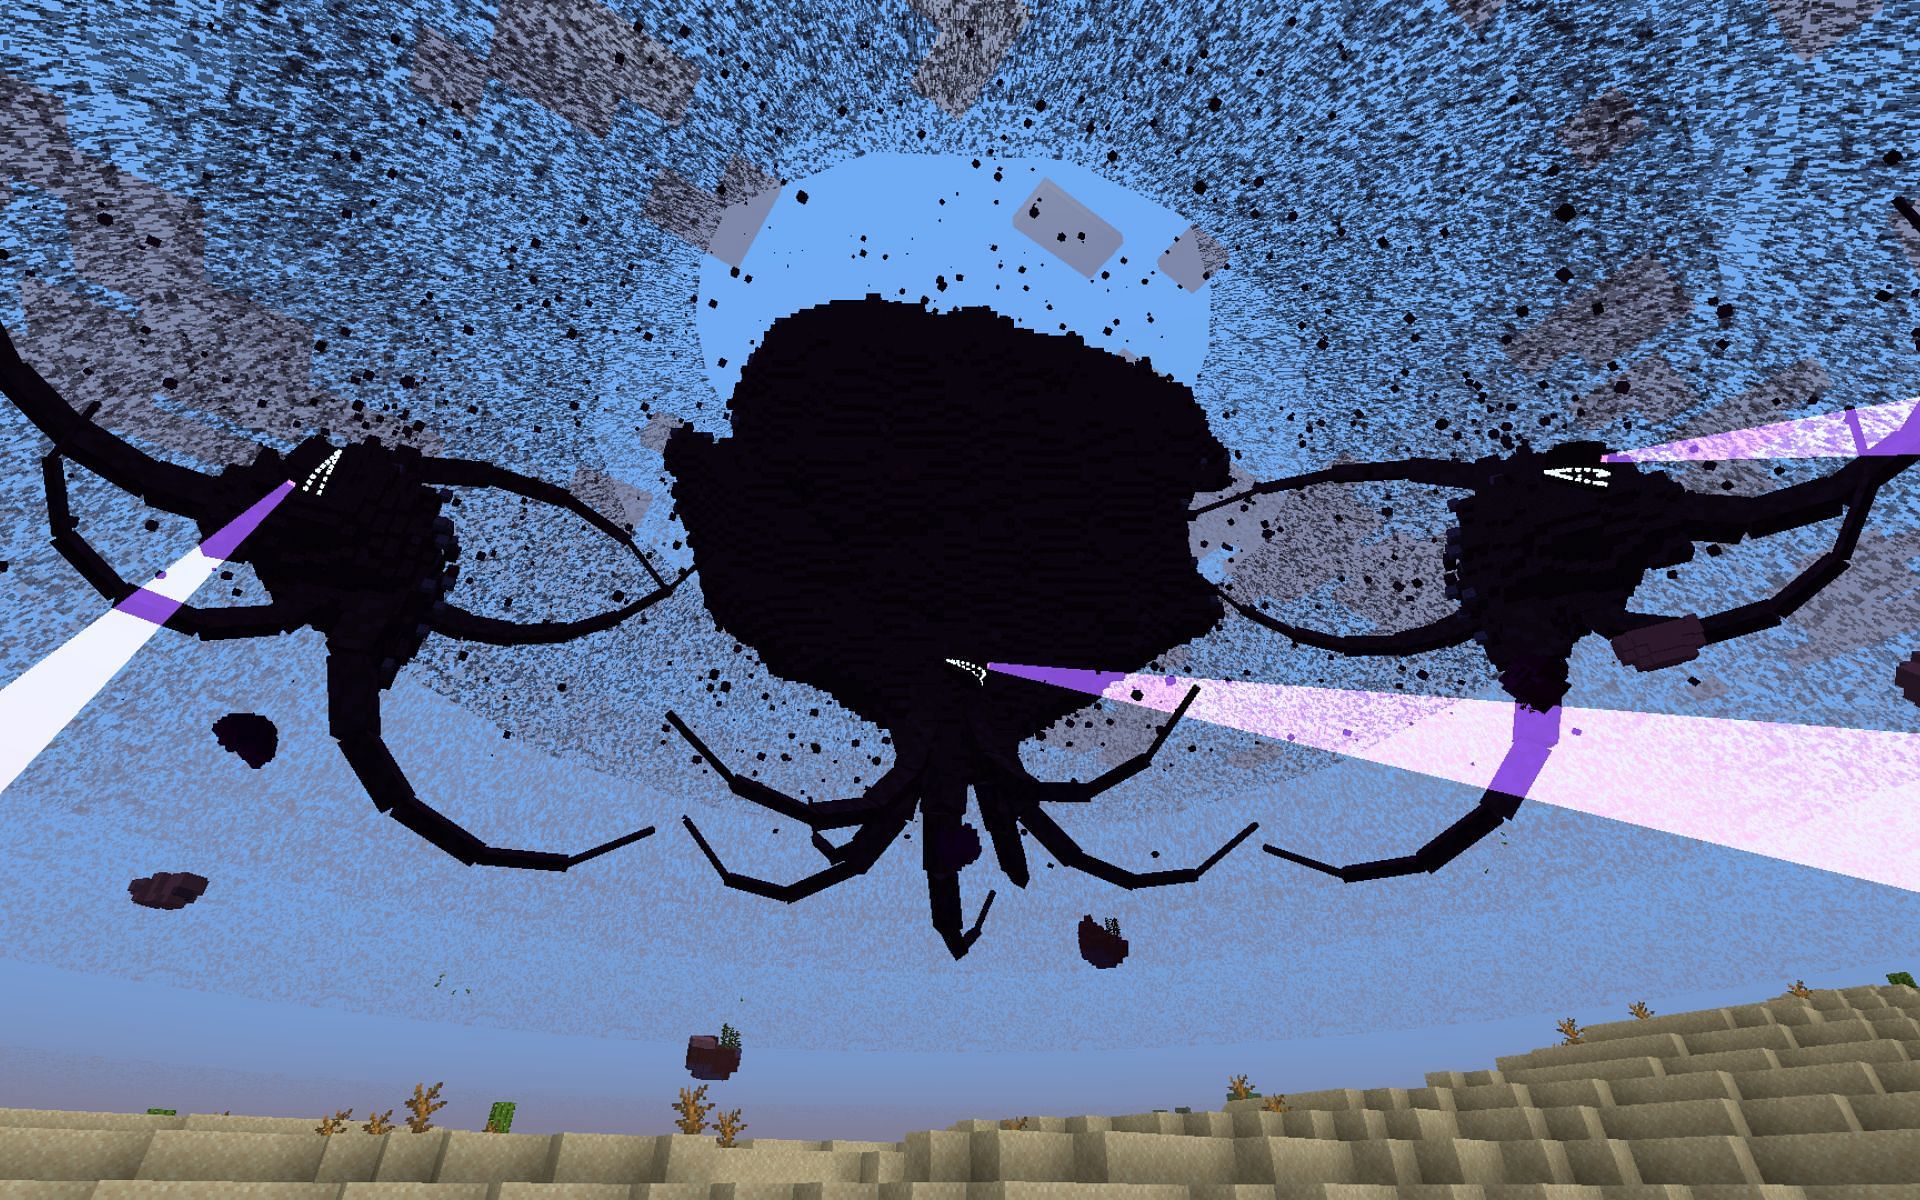 Minecraft Wither Storm Mod mod 2023 download